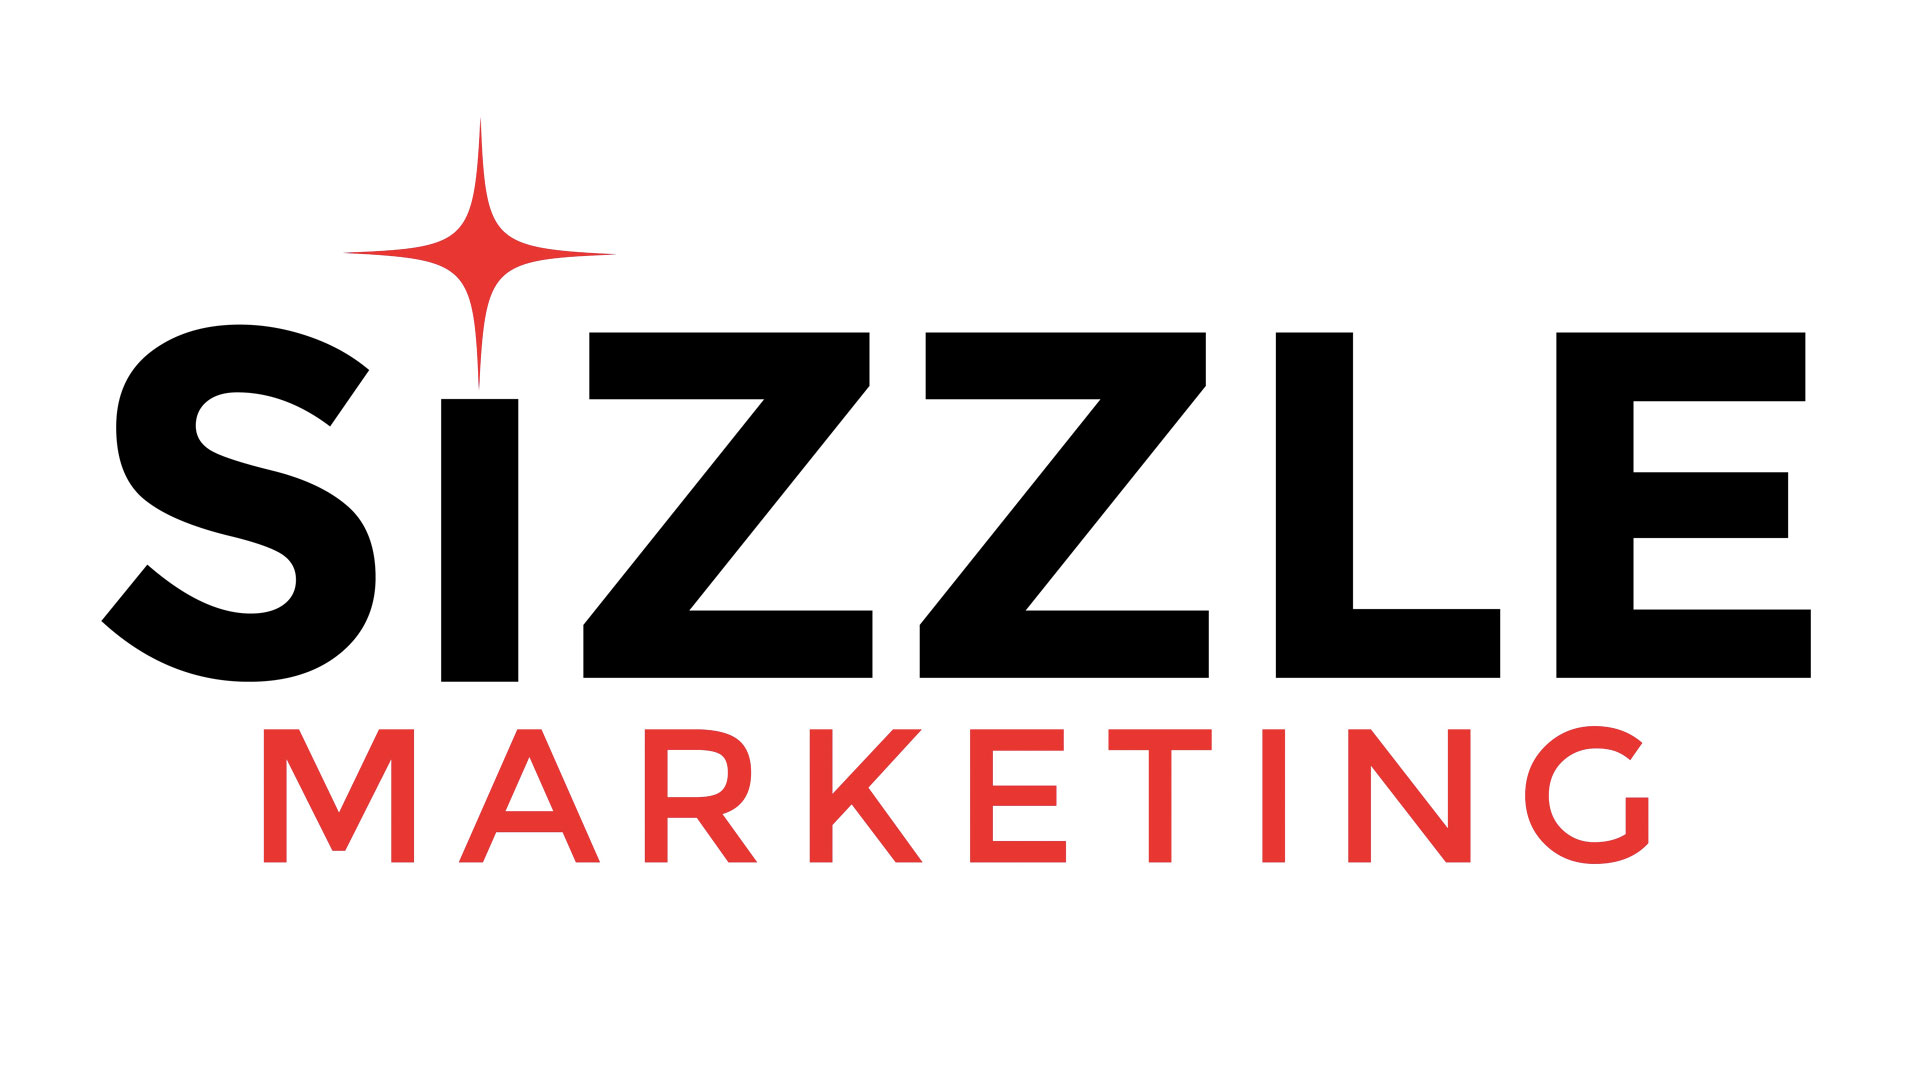 Sizzle Marketing Offer